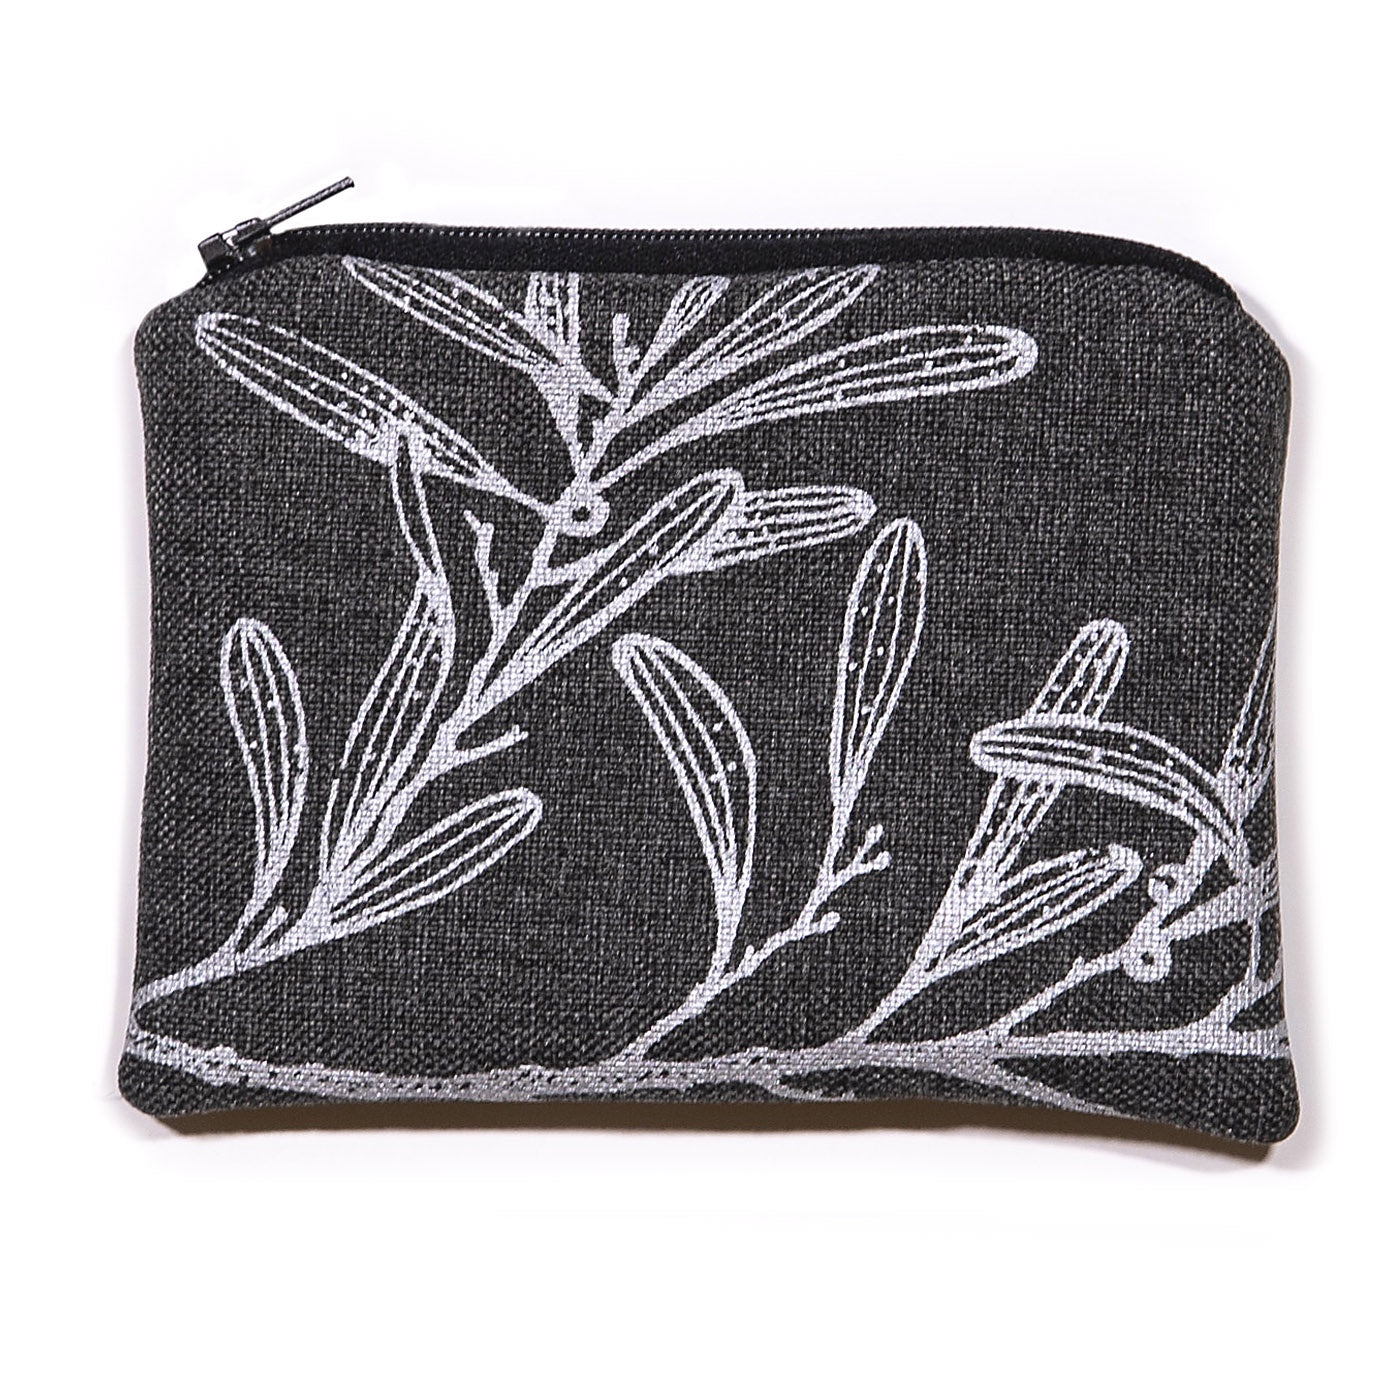 Stalley Textile Co - Zip Purse - Small - Blackwood - Silver on Charcoal